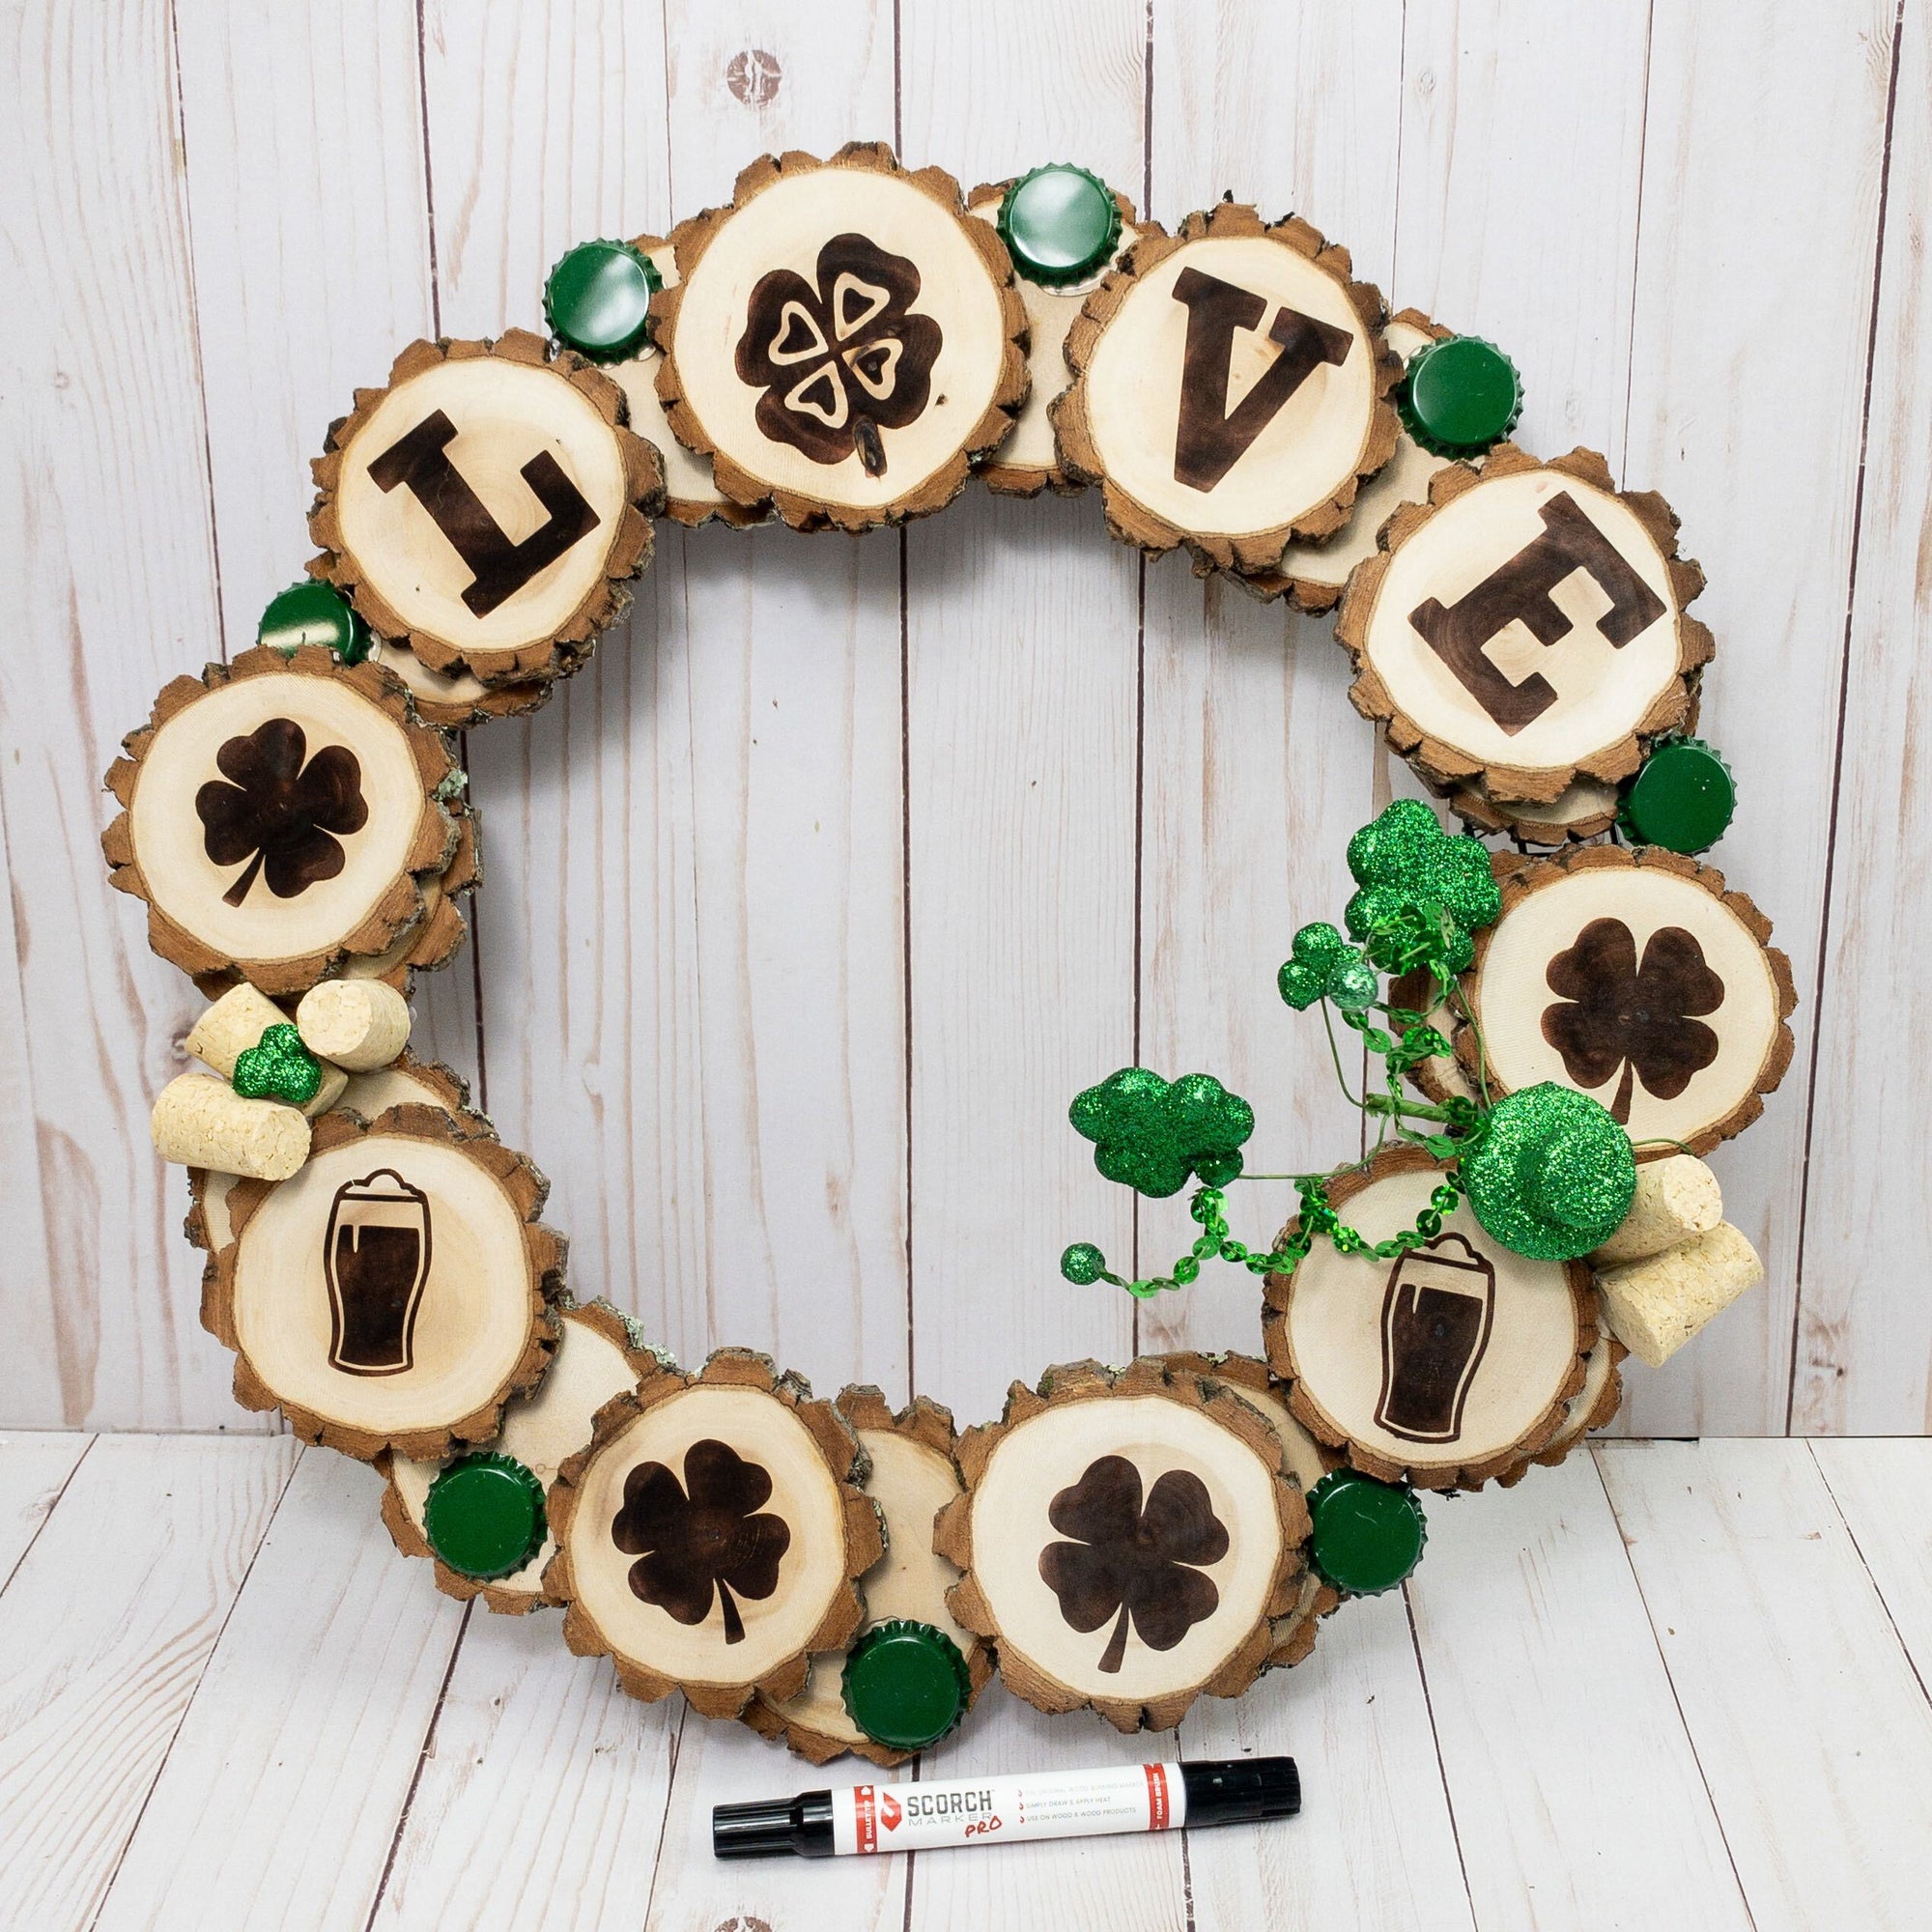 How to Craft a Wood-Burned St. Patrick's Day Wreath